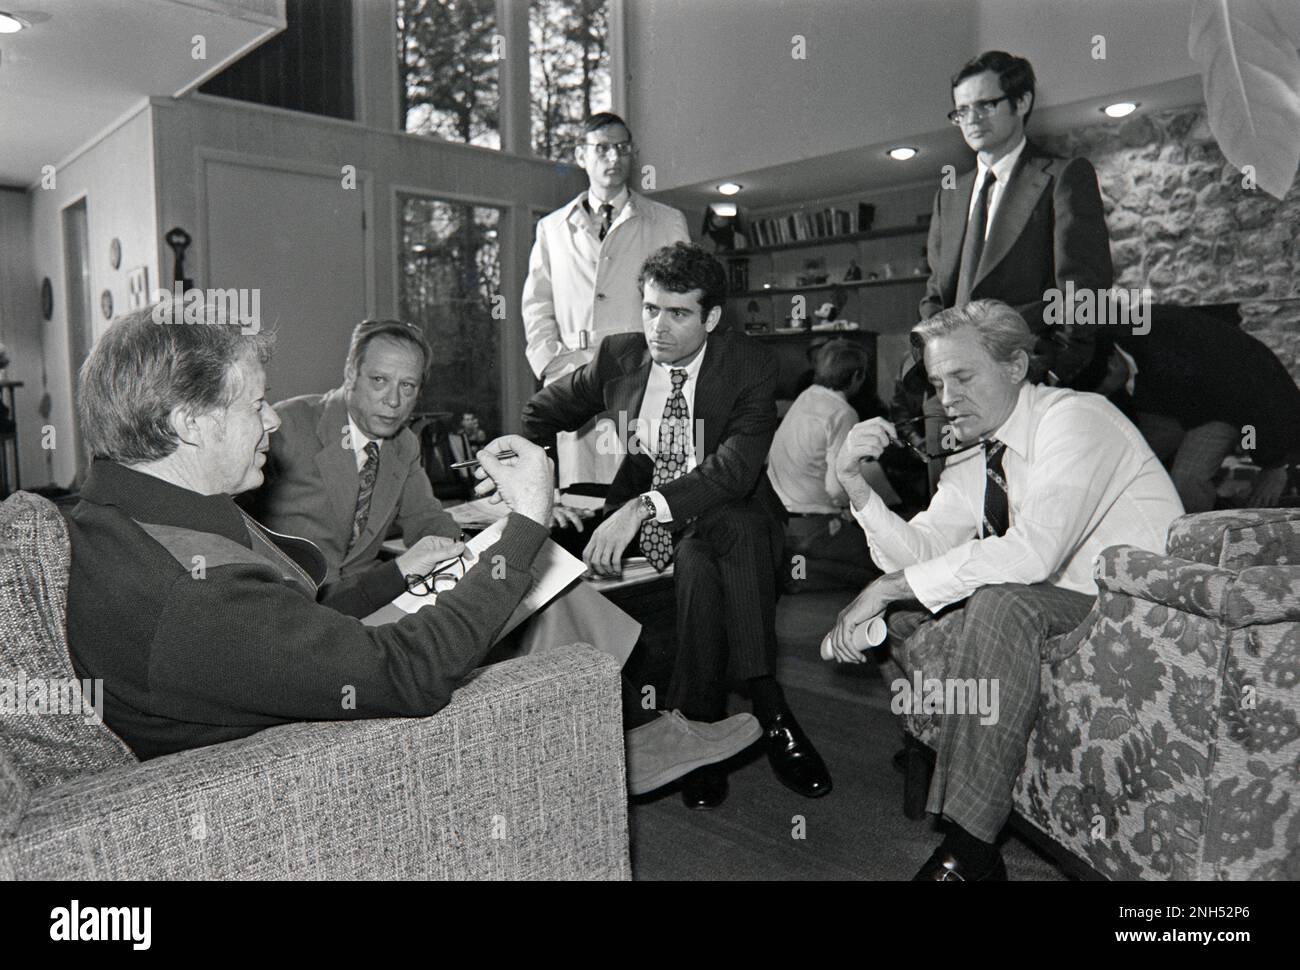 President elect Jimmy Carter holds a transition meeting with Vice President elect Walter Mondale and his nominees for cabinet positions in his administration. The meeting was held at Carter's getaway - 'The Pond House'. Stock Photo